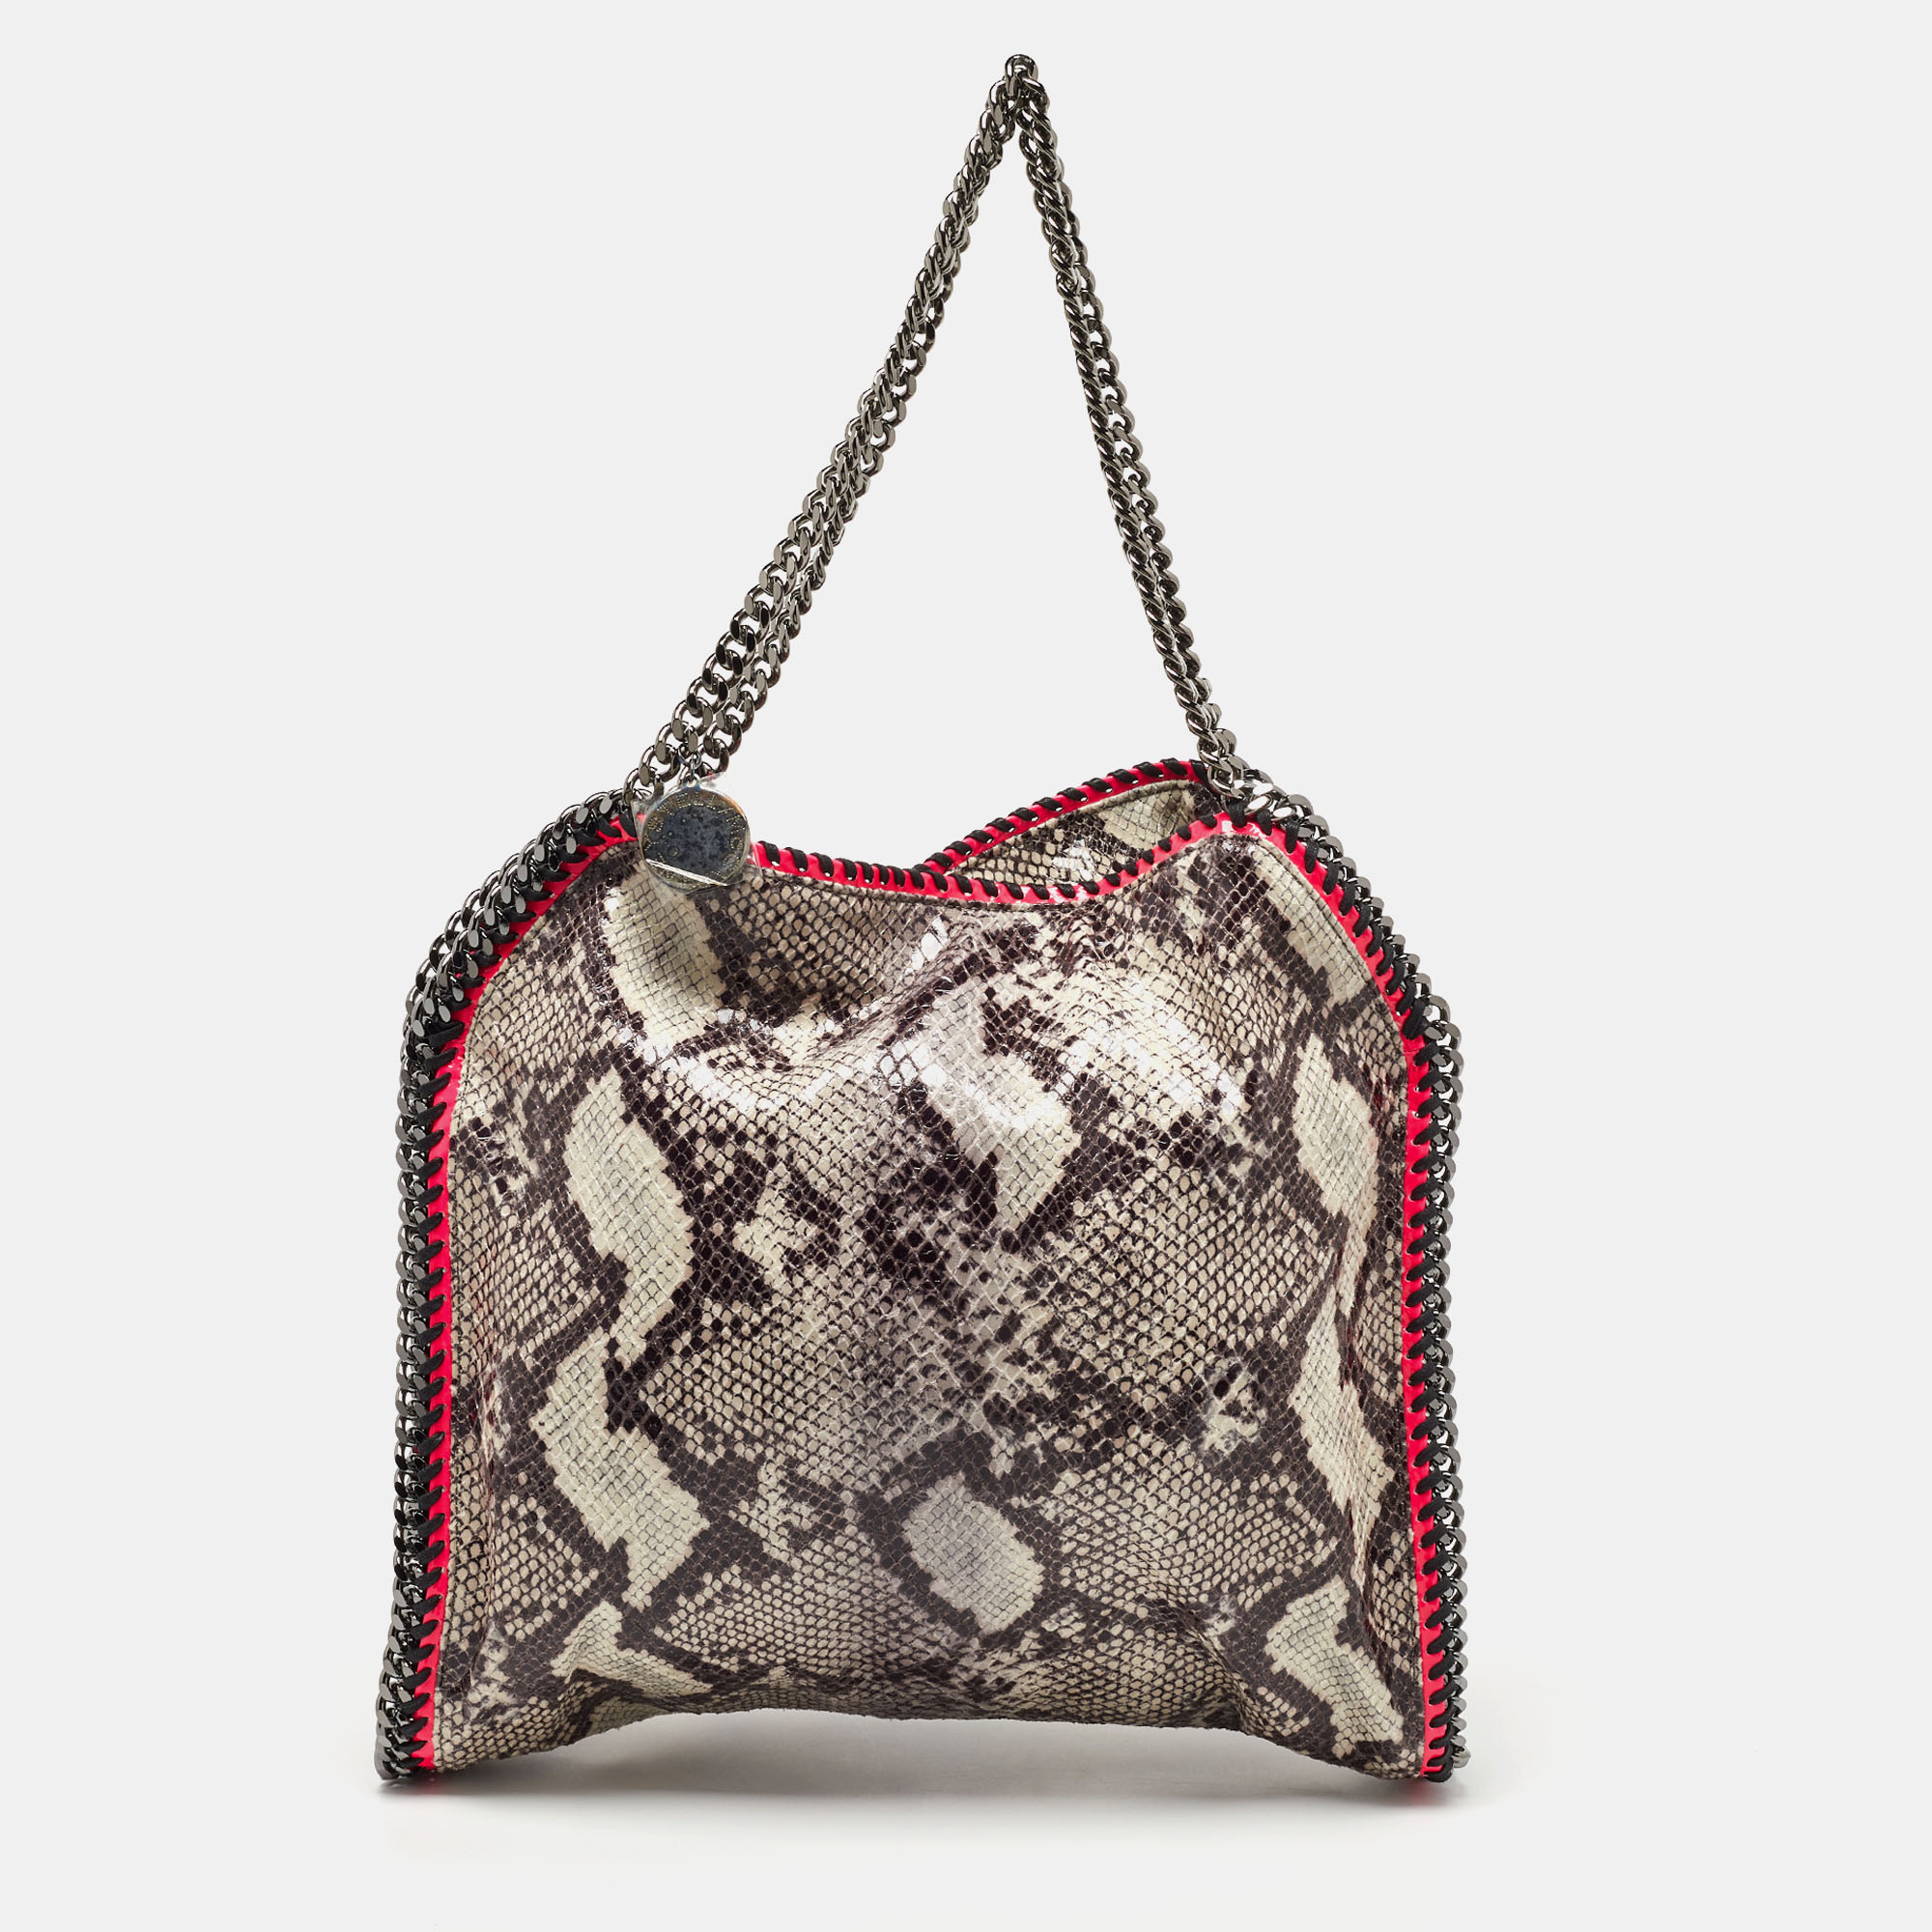 Stella McCartney Beige/Pink Faux Python Embossed Leather And Faux Patent Falabella Tote